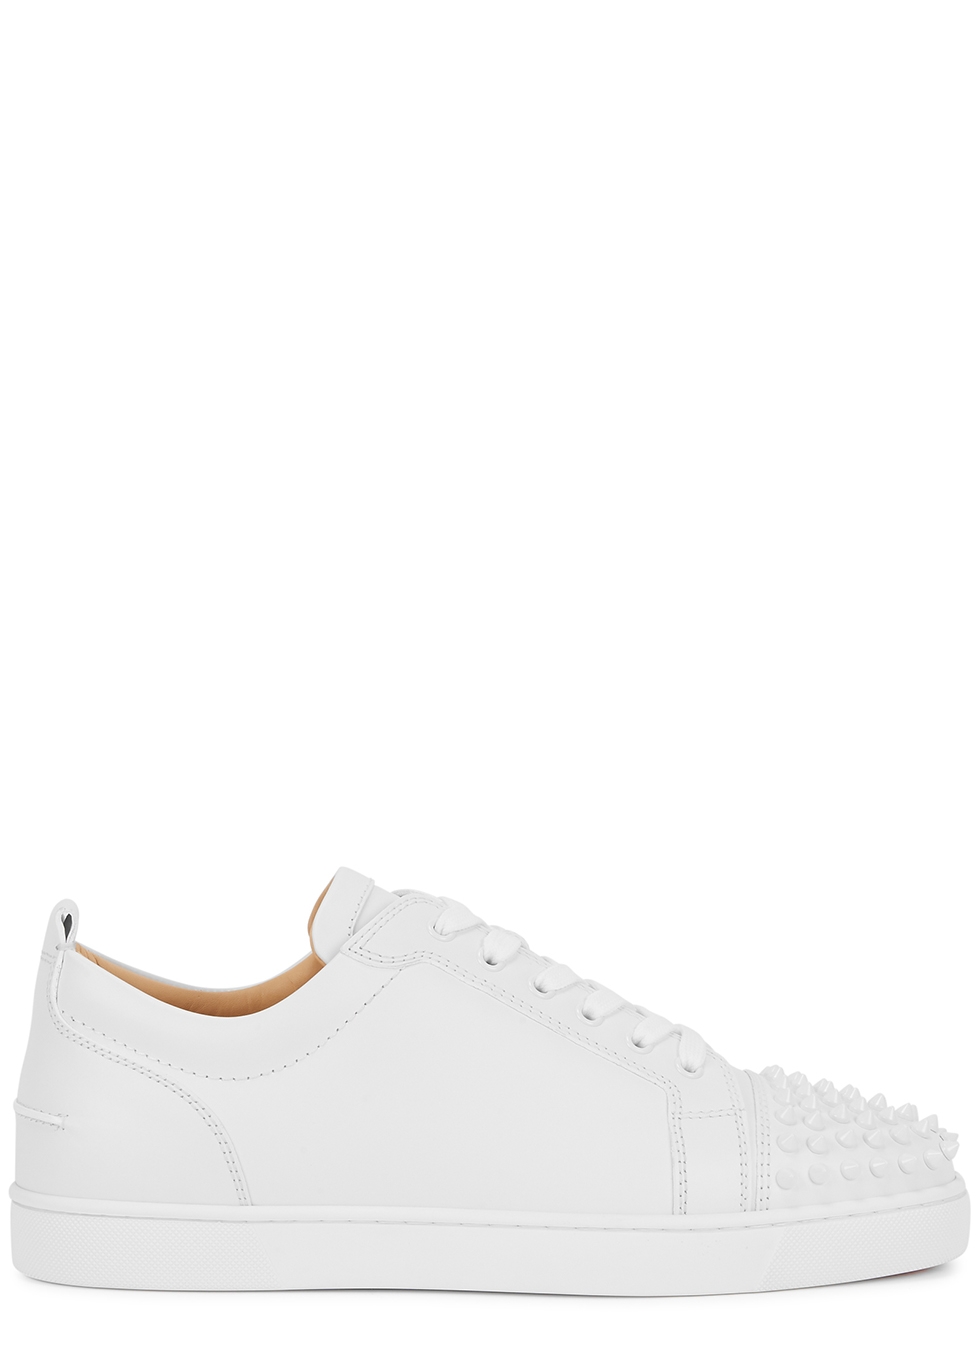 white sneakers with spikes